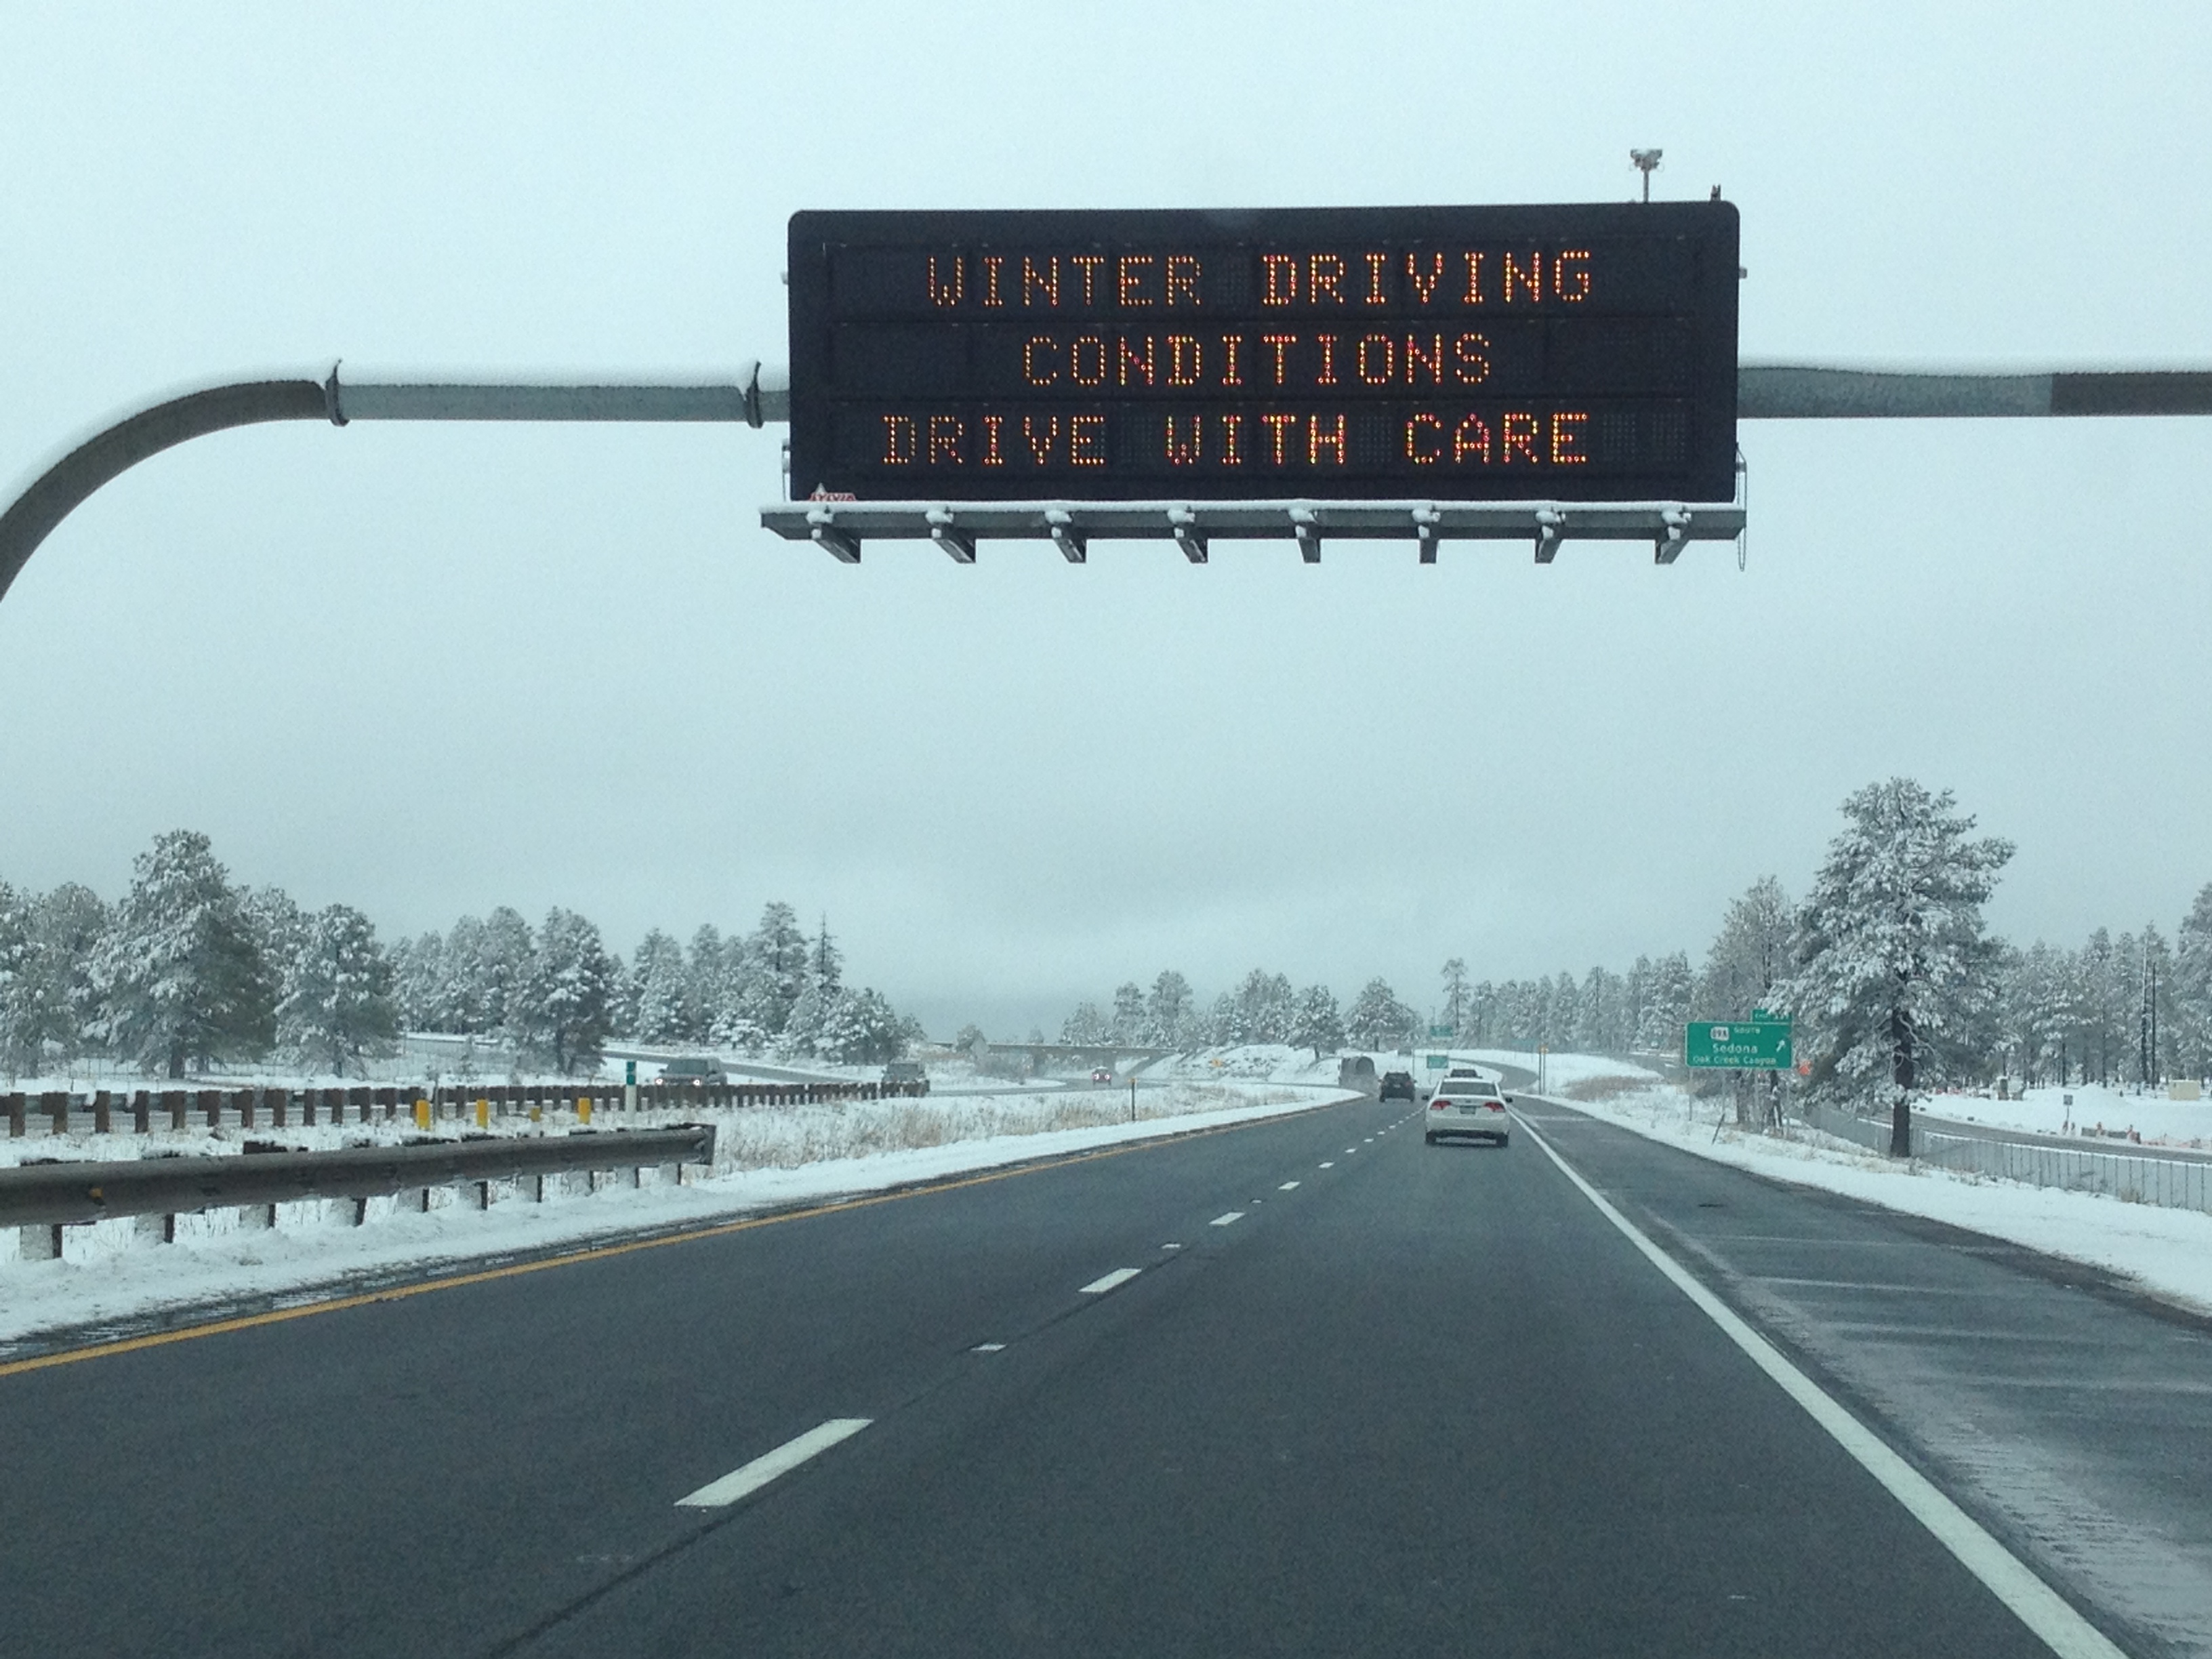 Winter driving conditions on a highway